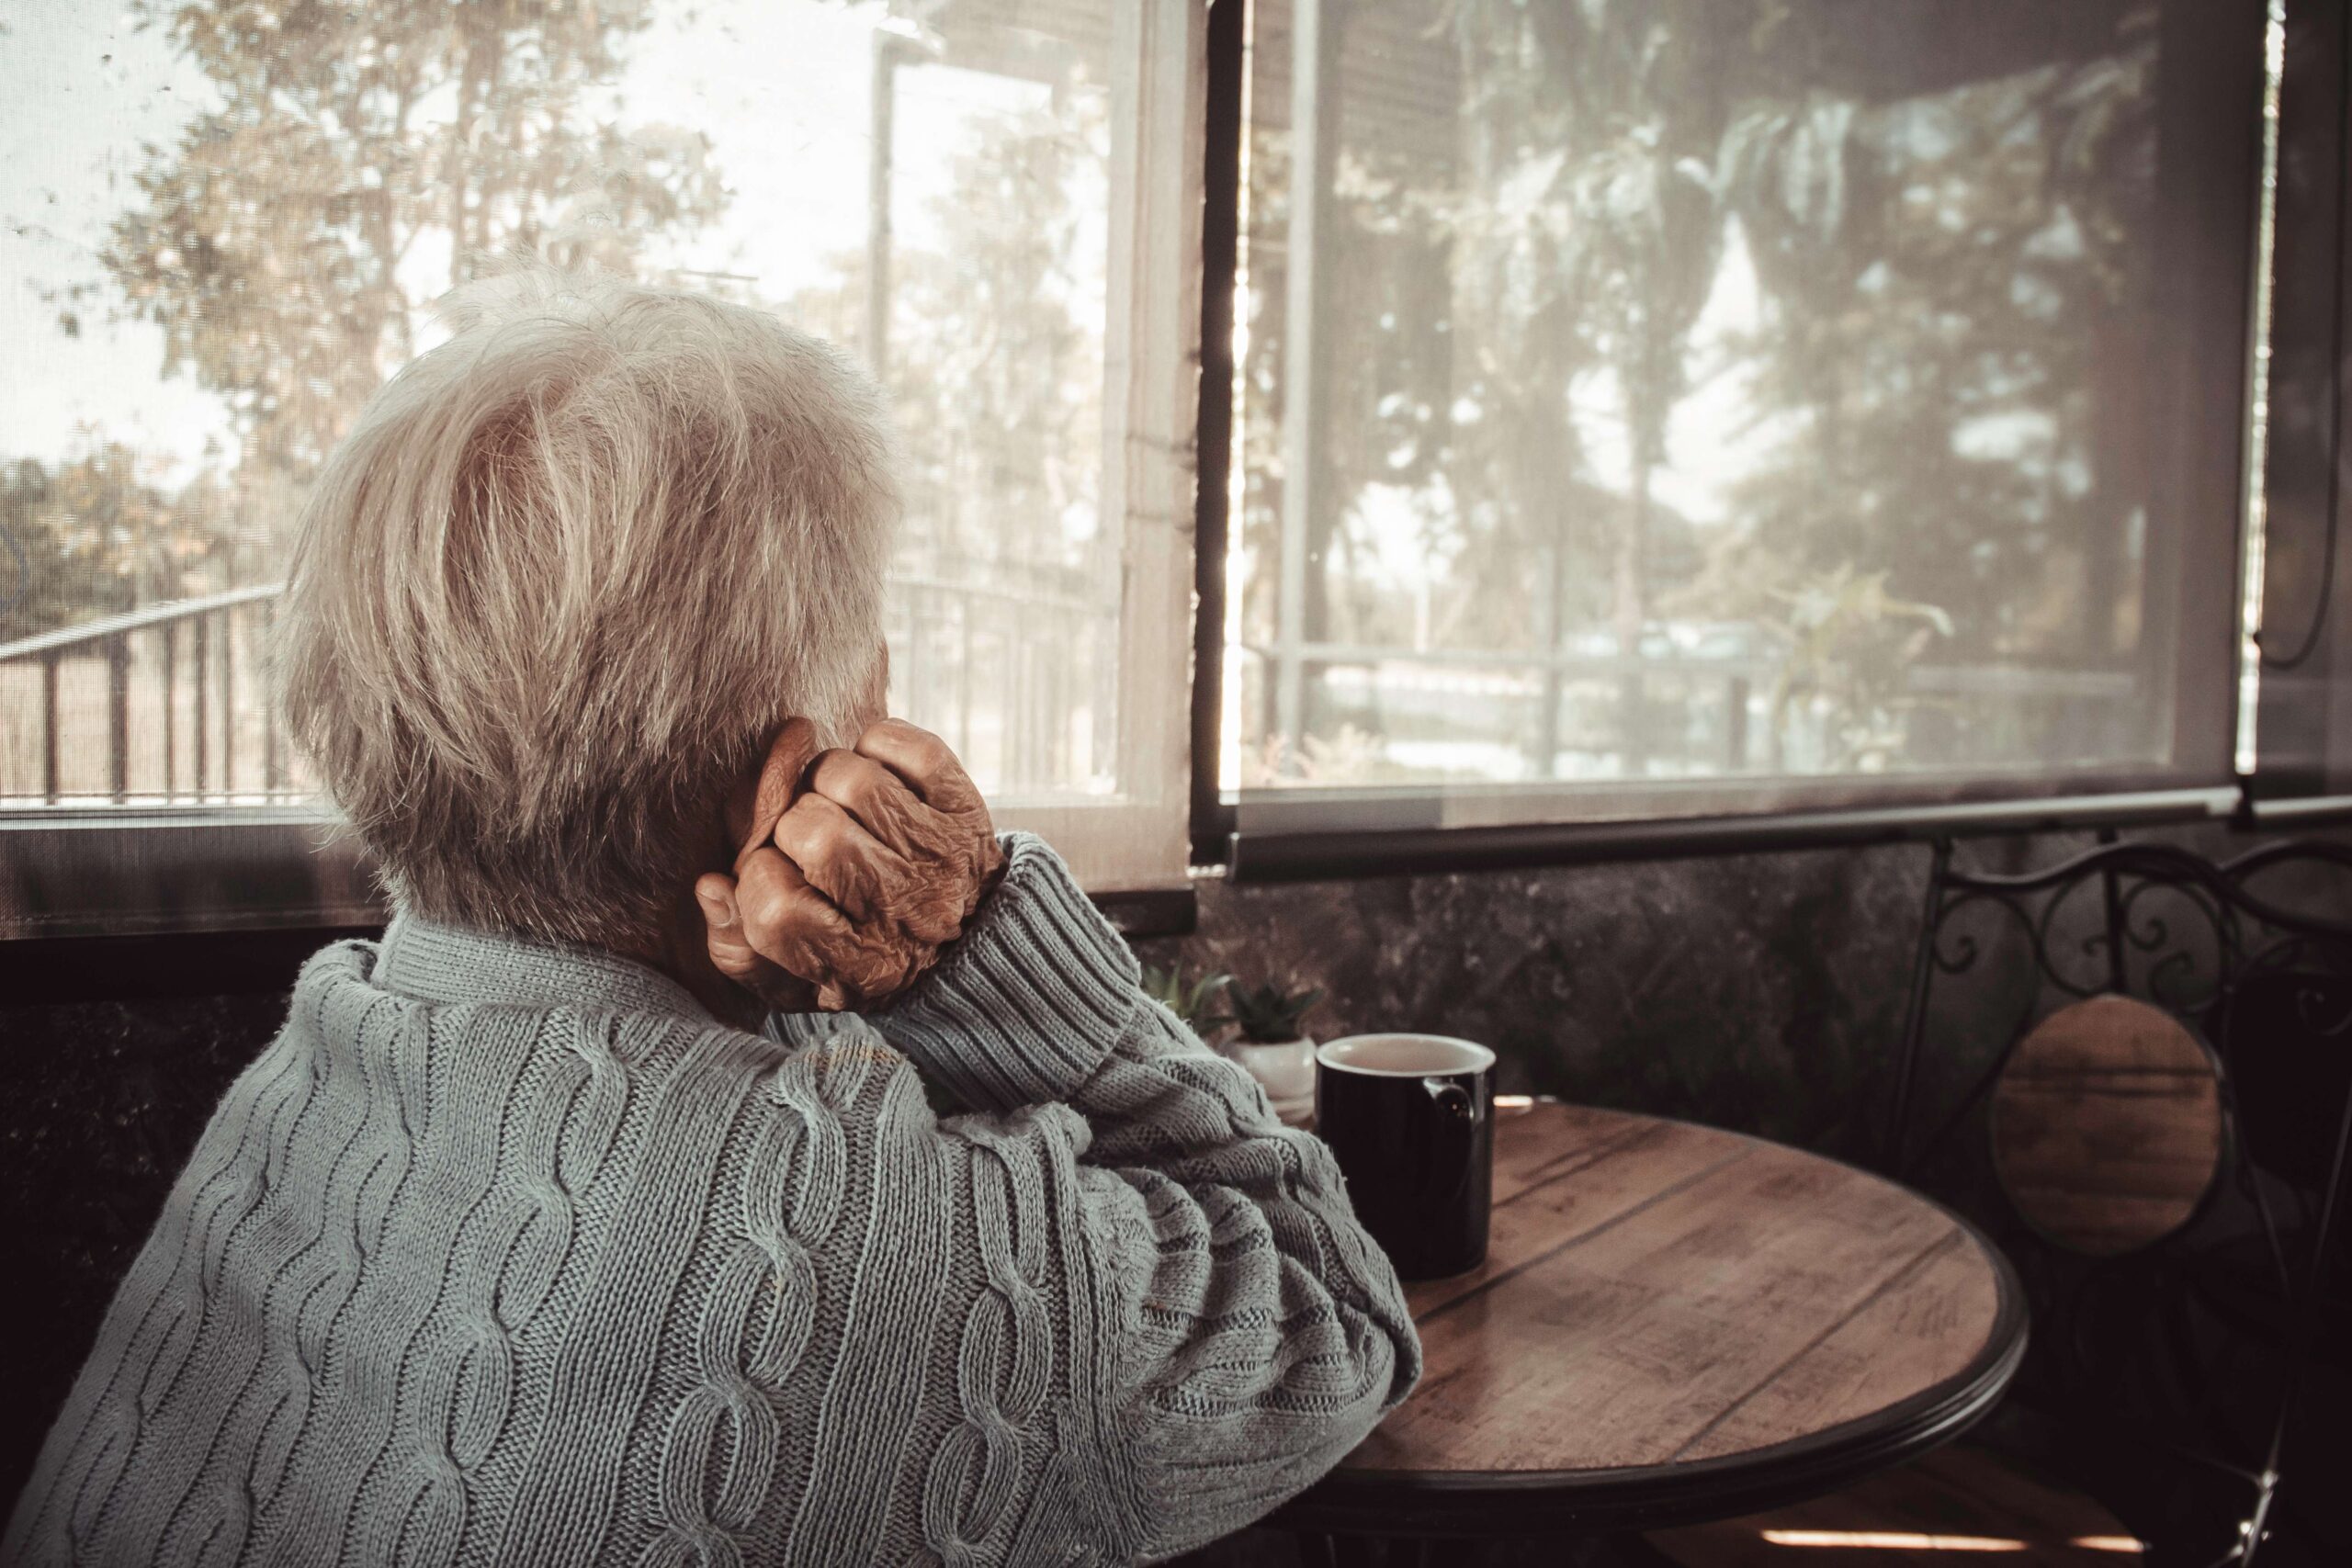 What Is Considered Neglect in a Nursing Home